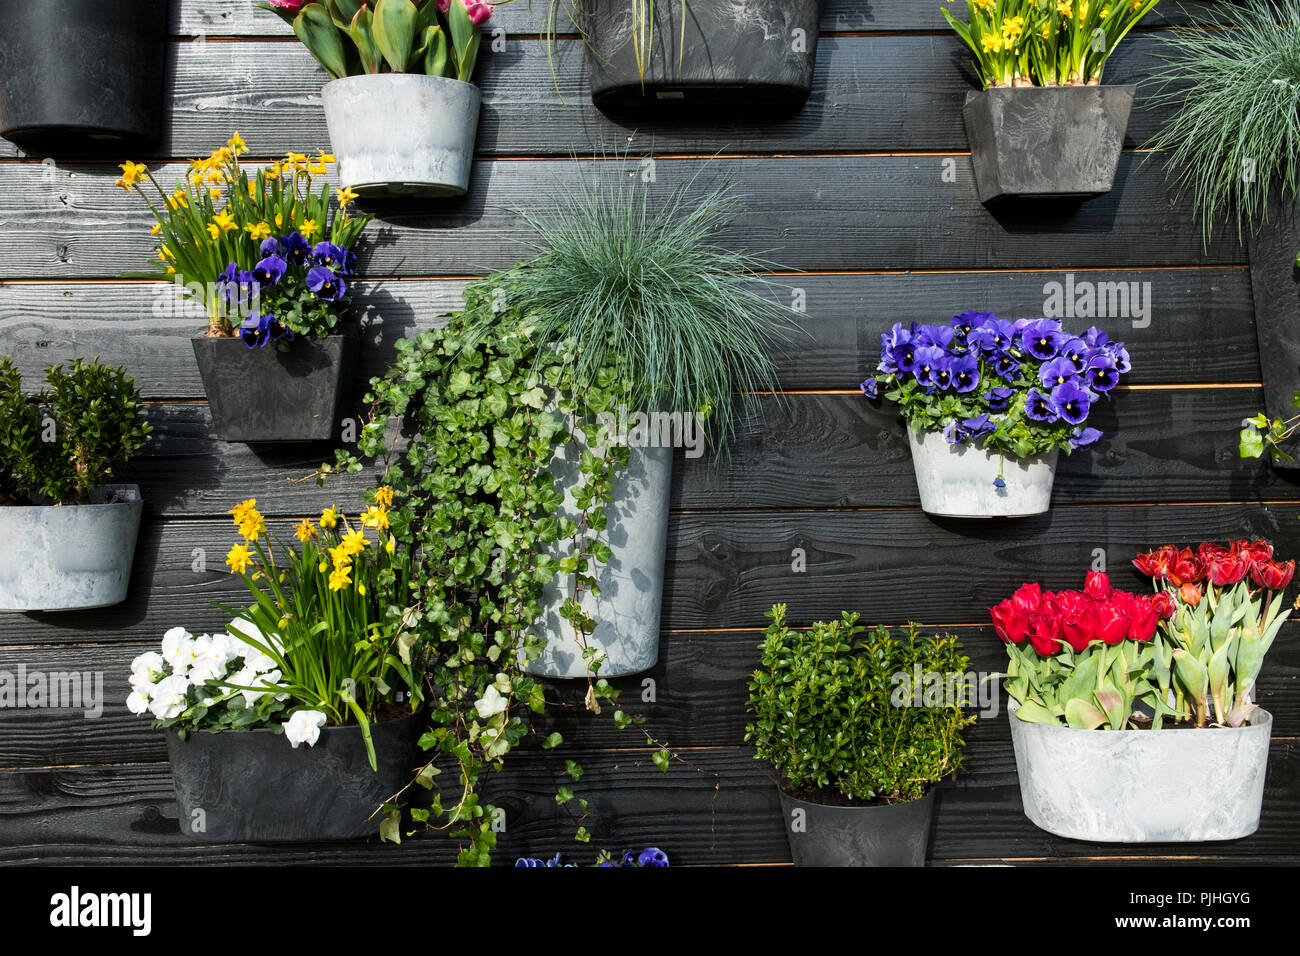 Small planters with plants against a wall Stock Photo